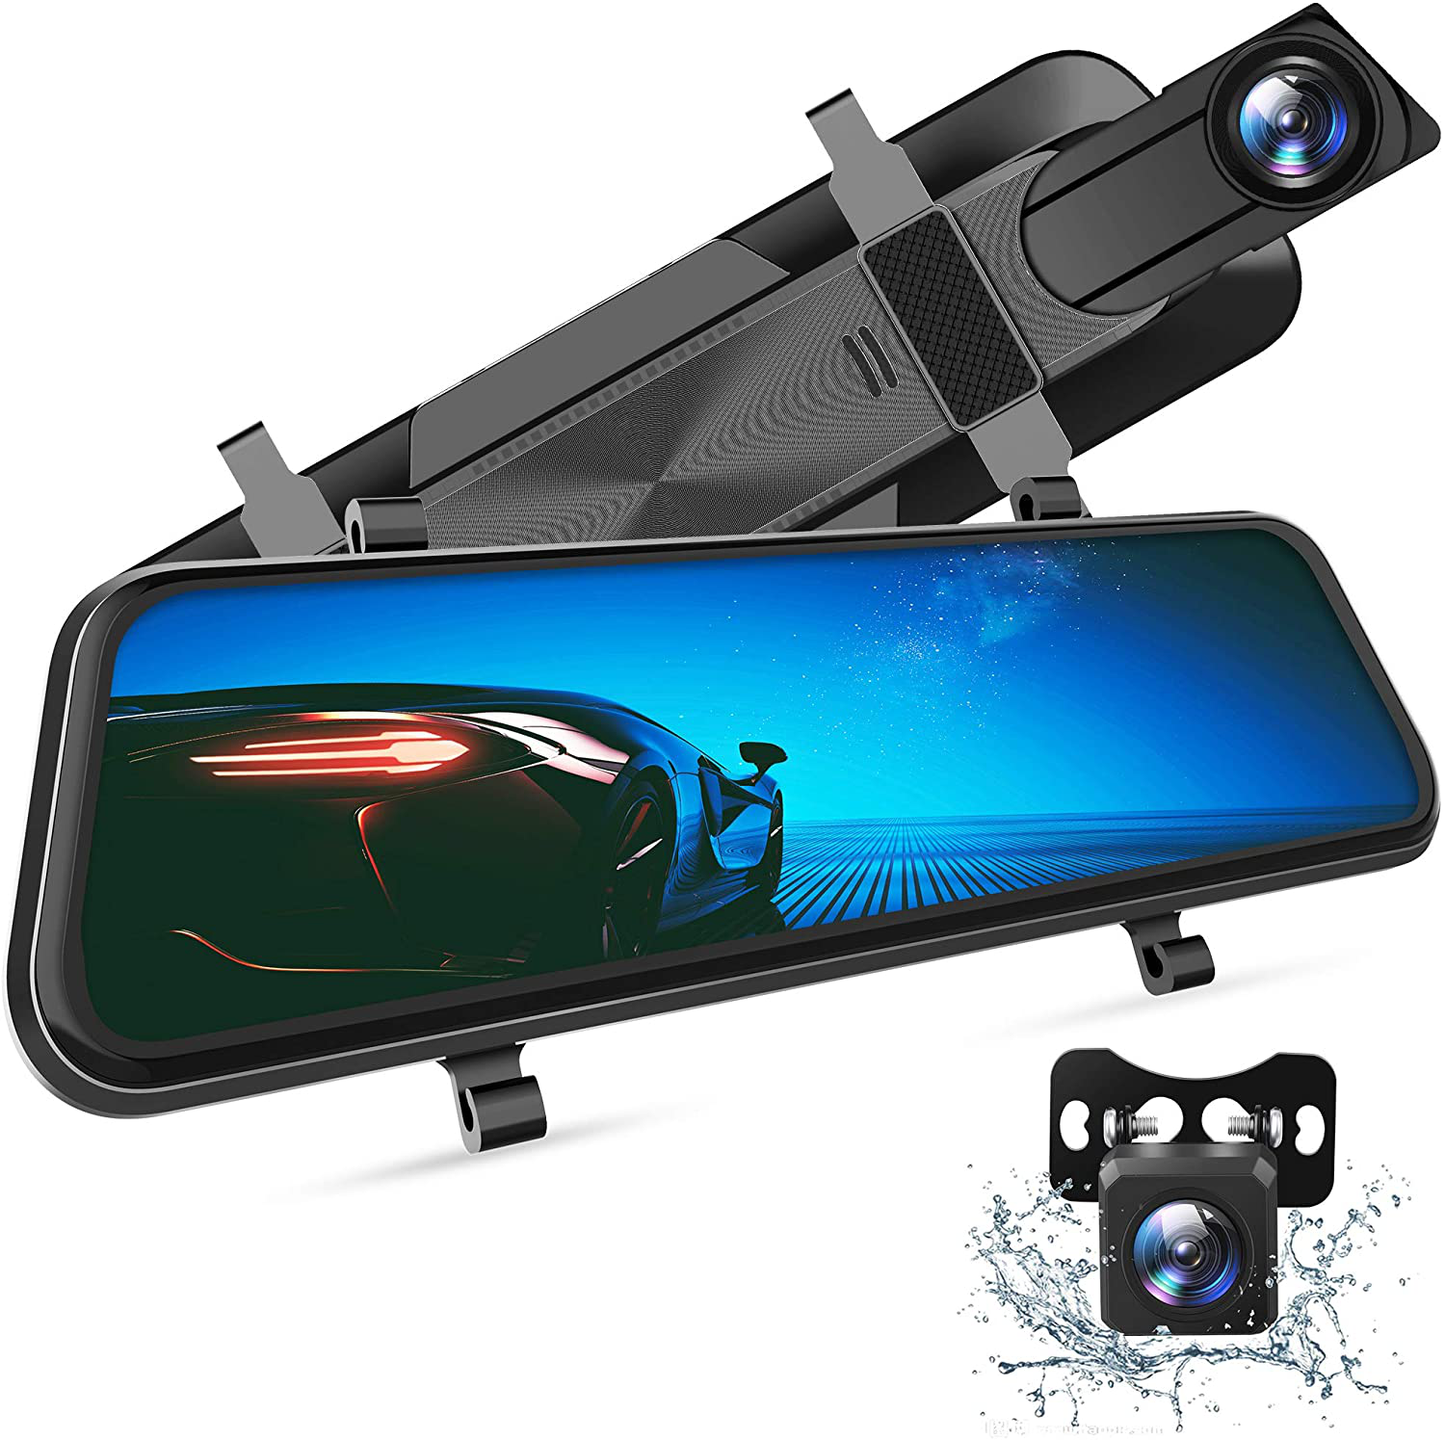 VanTop H610 10" 2.5K Mirror Dash Cam for Cars with Full Touch Screen, Waterproof Backup Camera Rear View Mirror Camera, Enhanced Night Vision with Sony Starvis Sensor, Parking Assistance